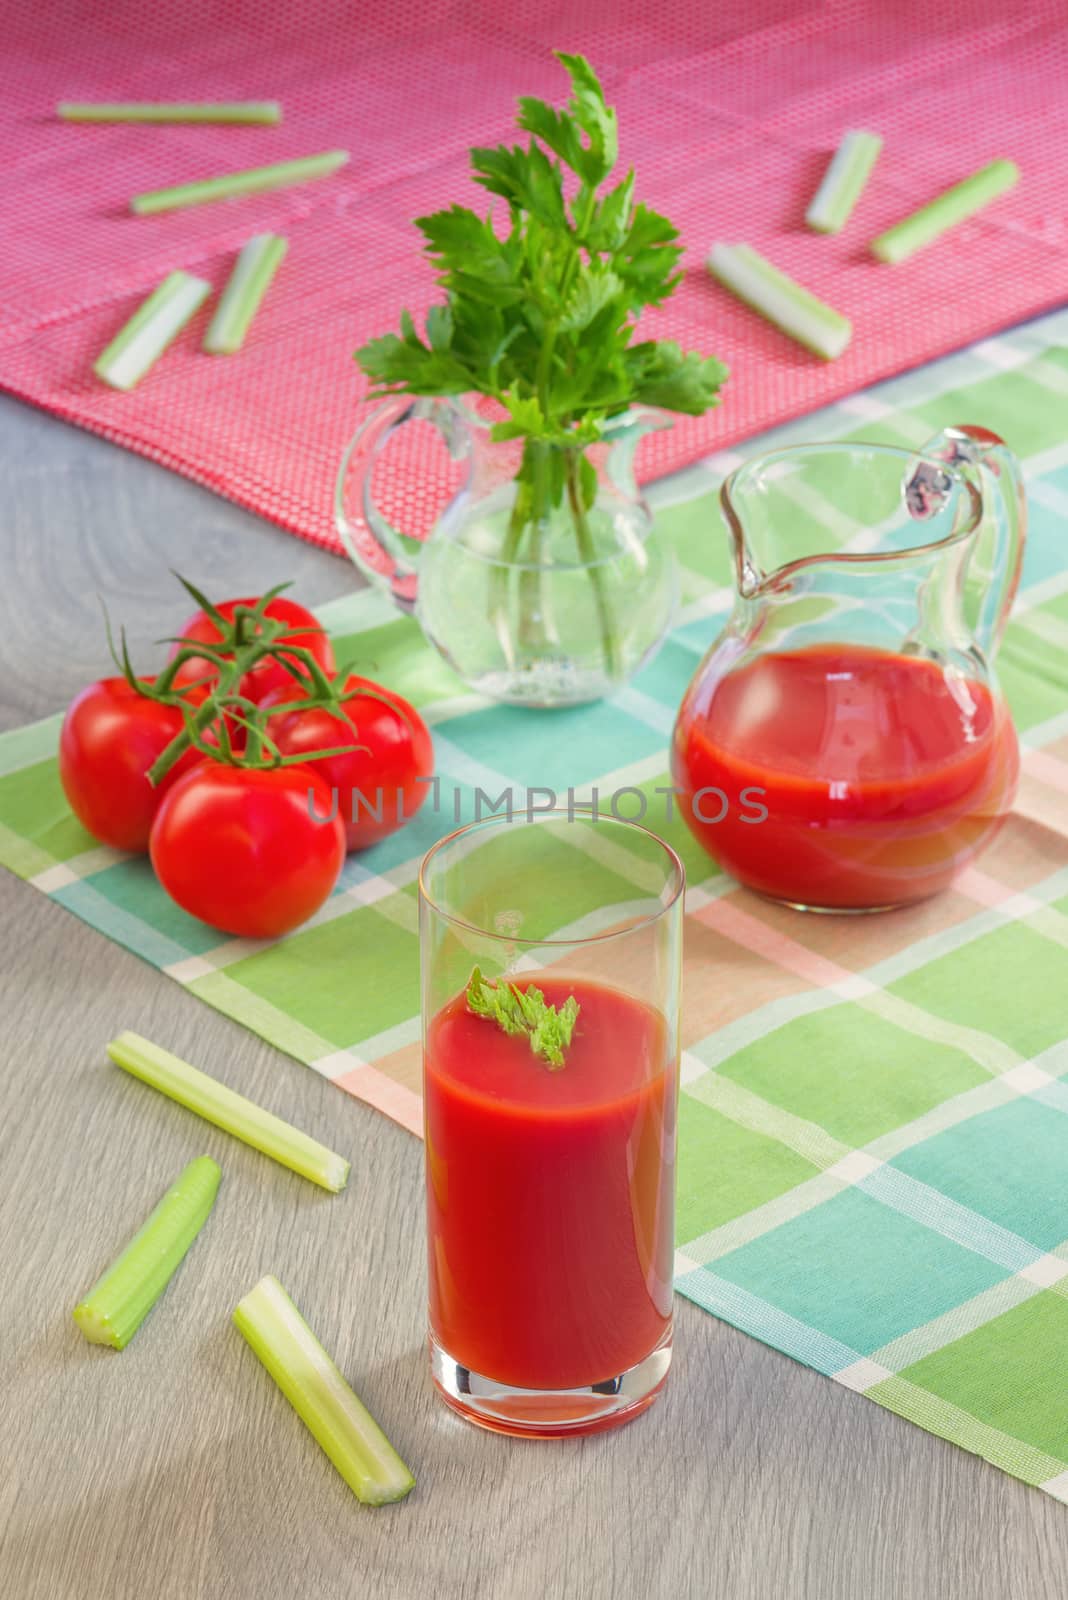 Glass with tomato juice, tomatoes, stalks and leaves of a celery on a table in style a rustic